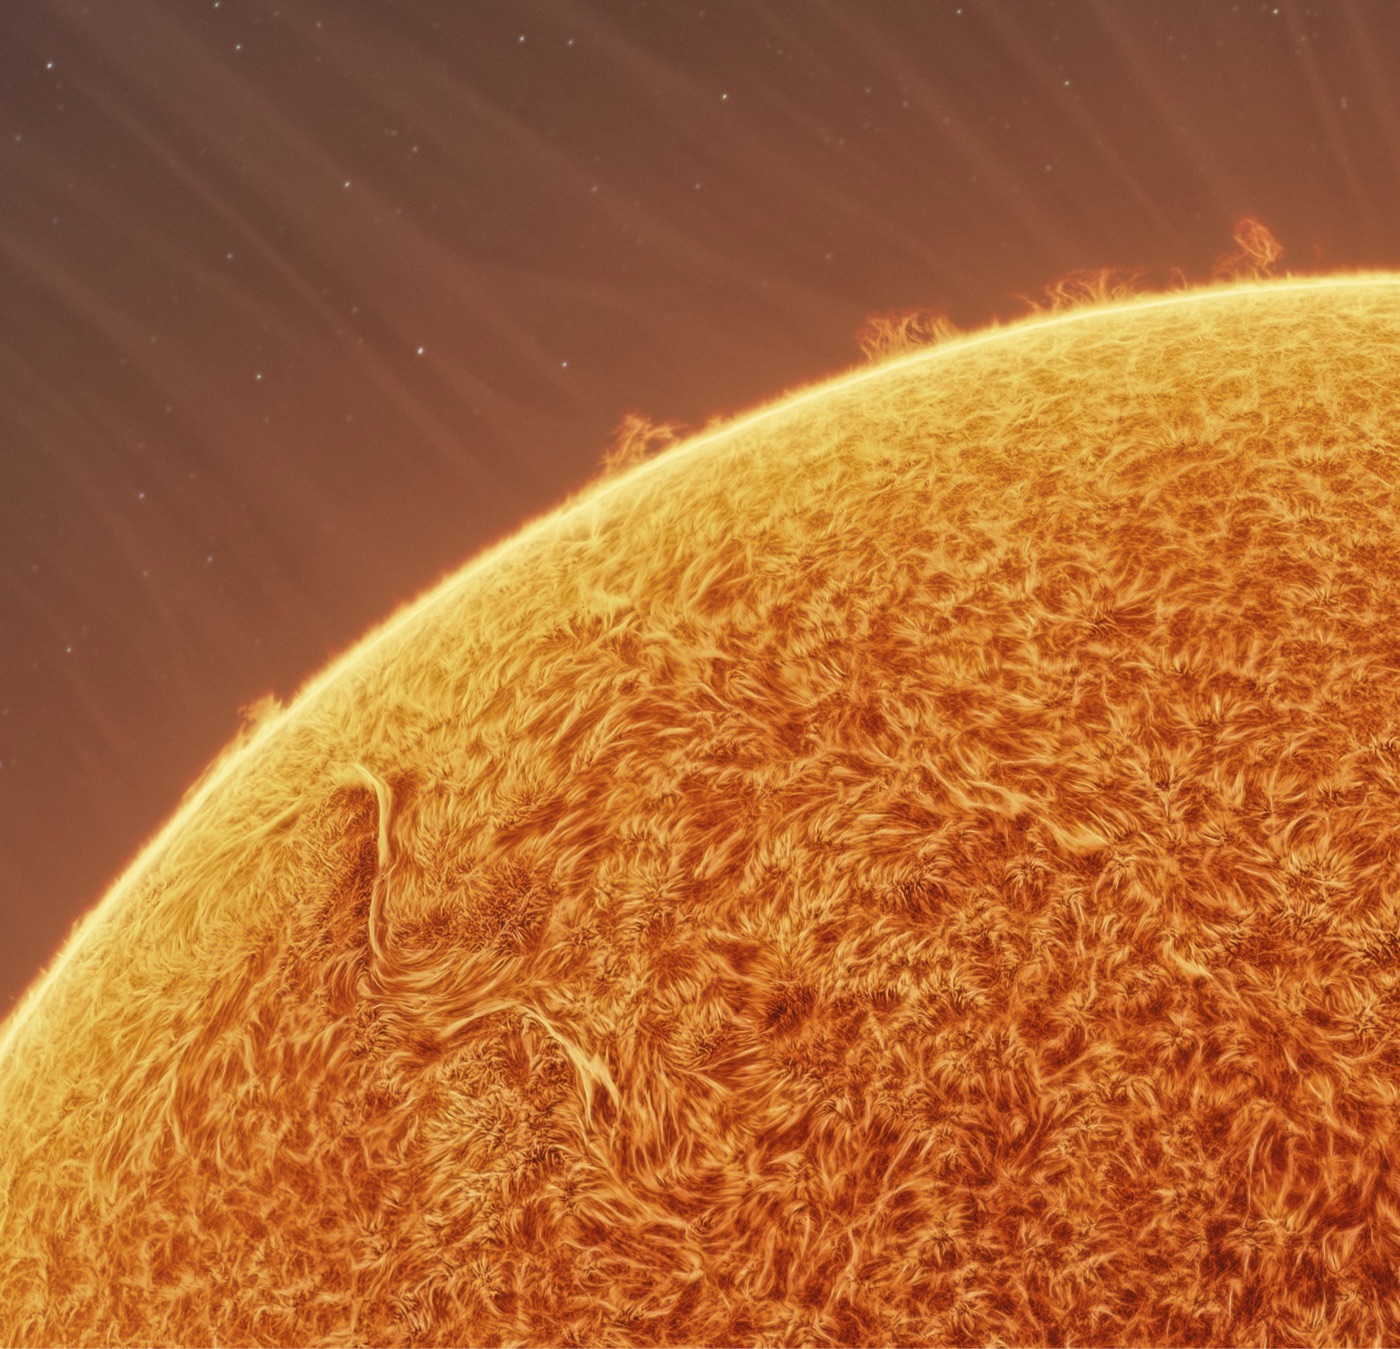 detail of an astounding image of the Sun